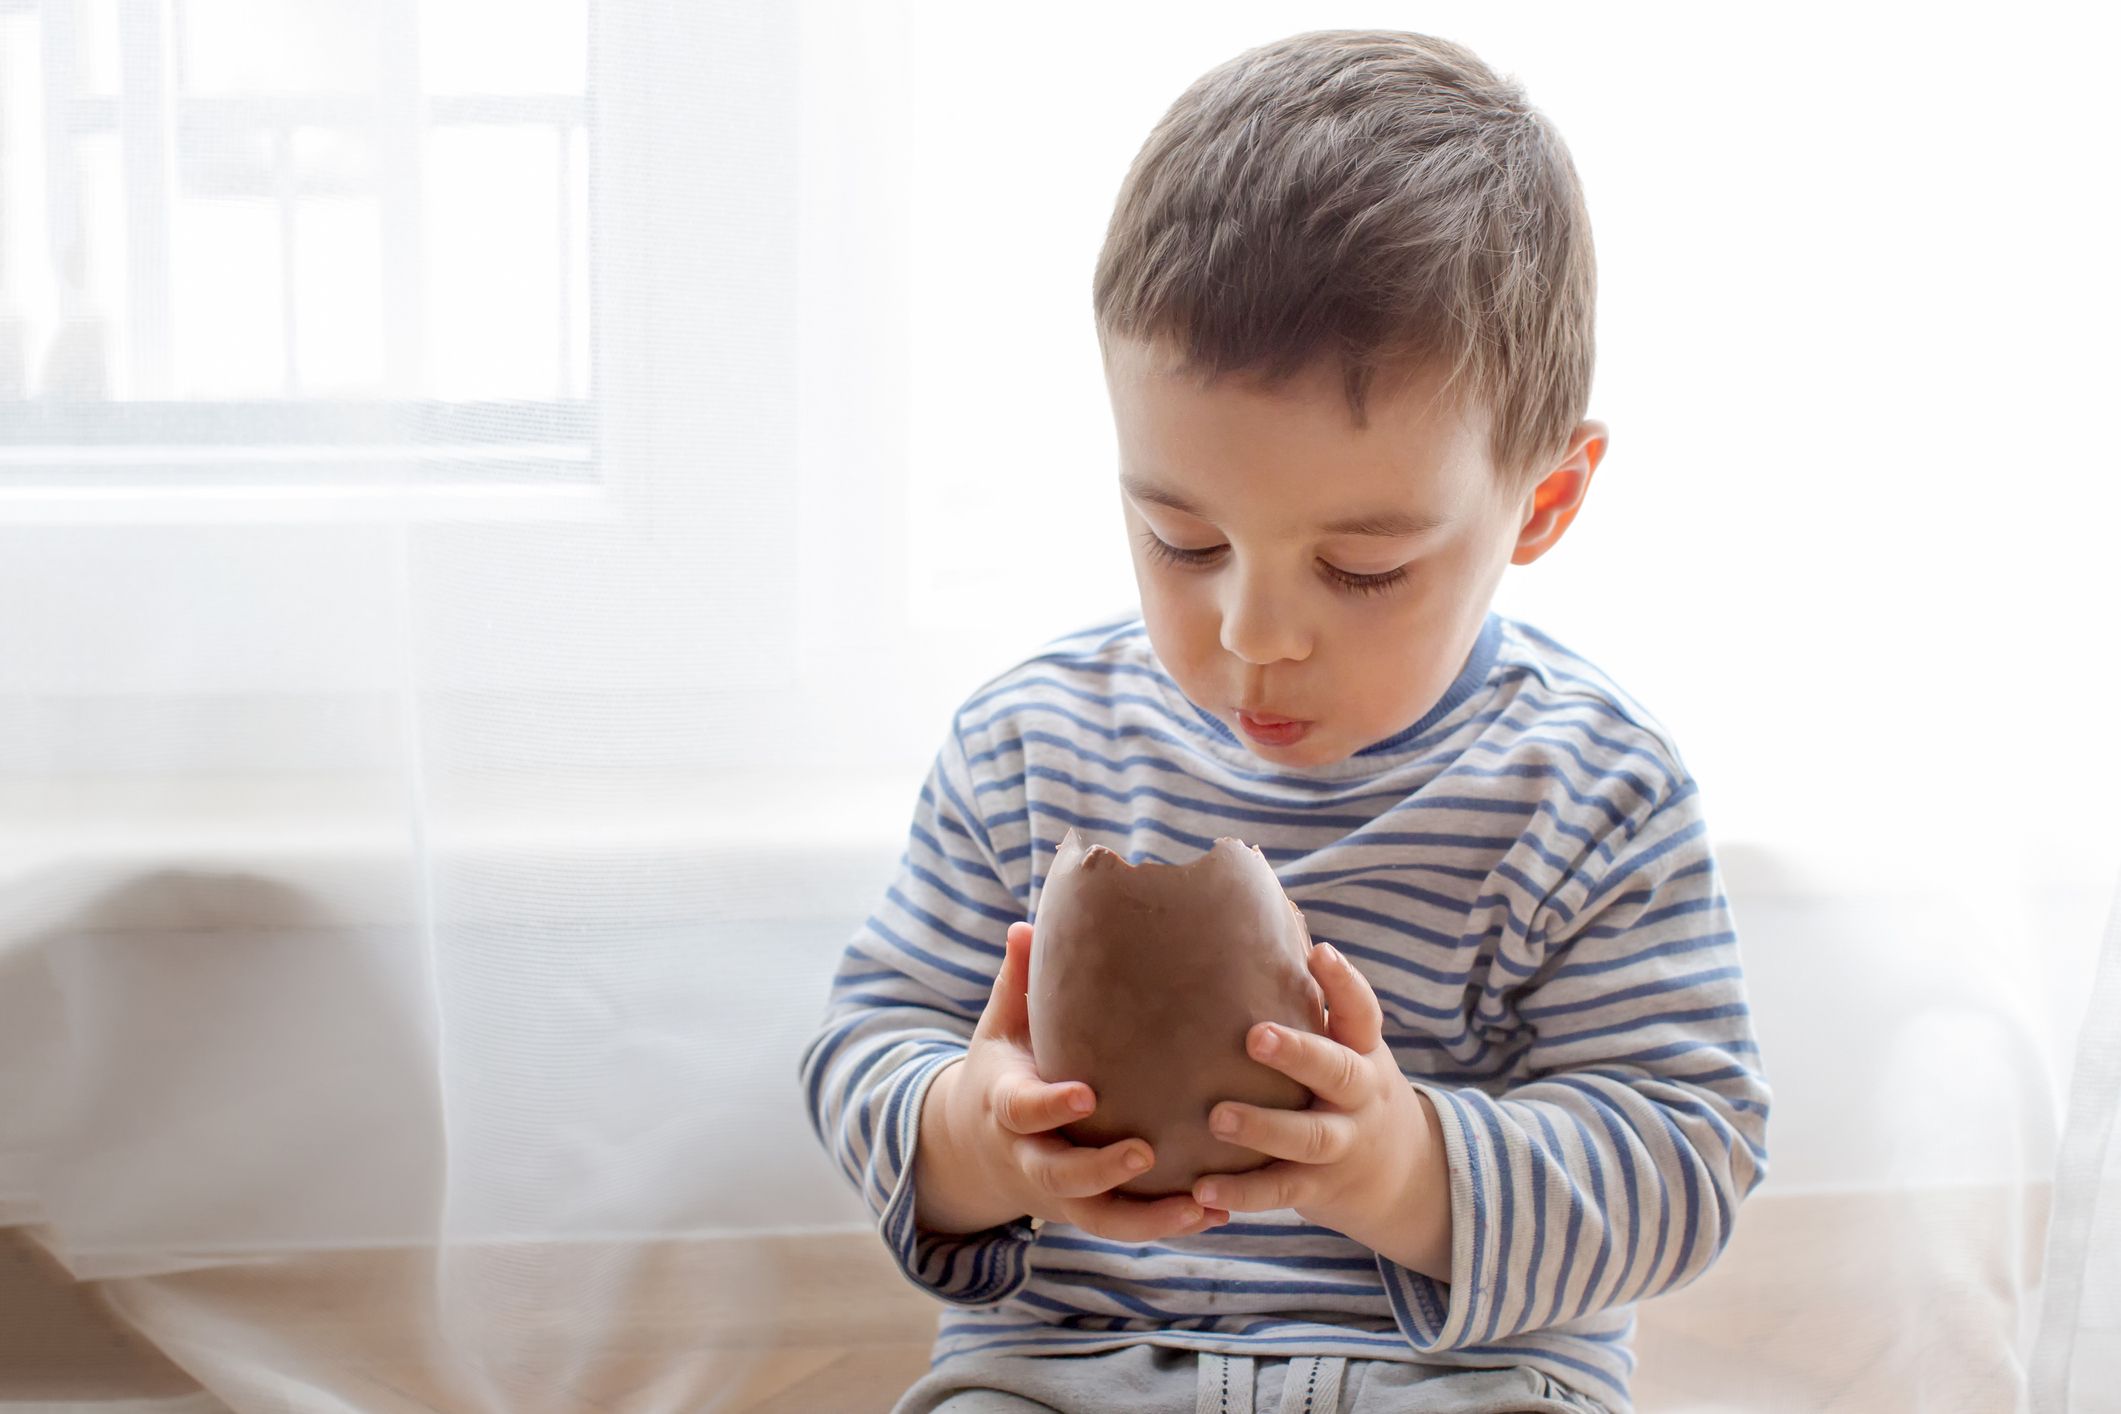 A little boy looks happy with chocolate in his hand. | Source: Shutterstock